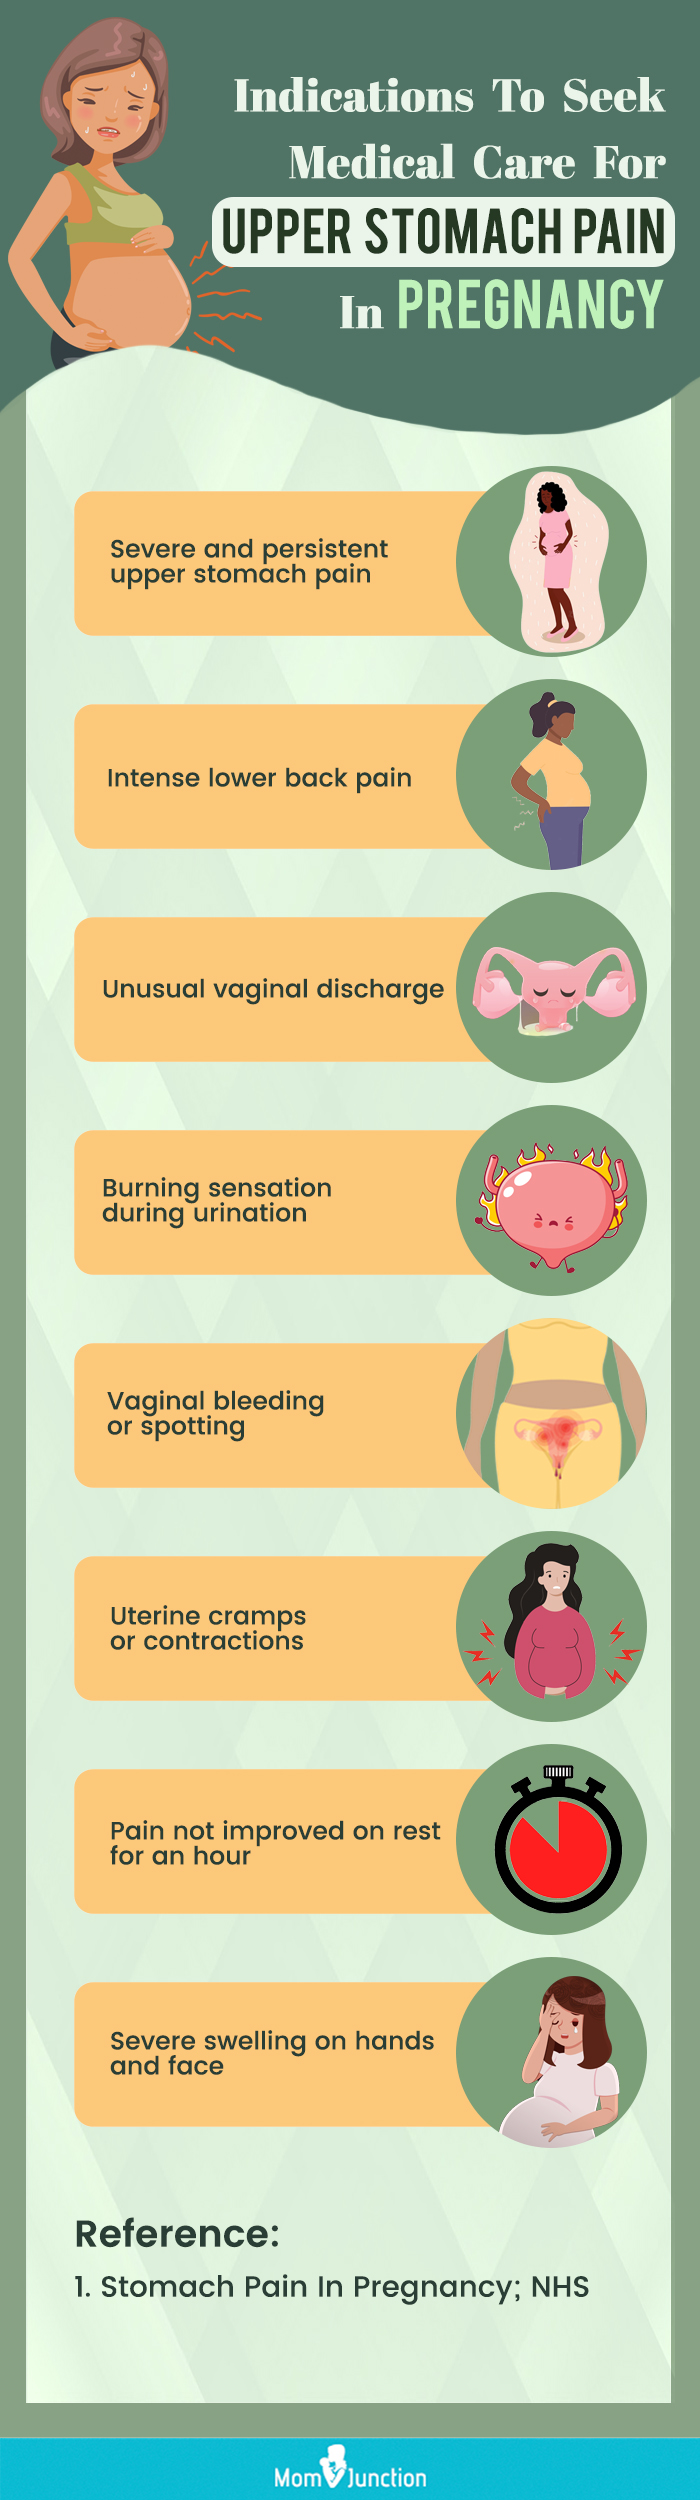 https://www.momjunction.com/wp-content/uploads/2021/10/Infographic-When-To-Seek-Medical-Care-For-Upper-Stomach-Pain-In-Pregnancy.jpg